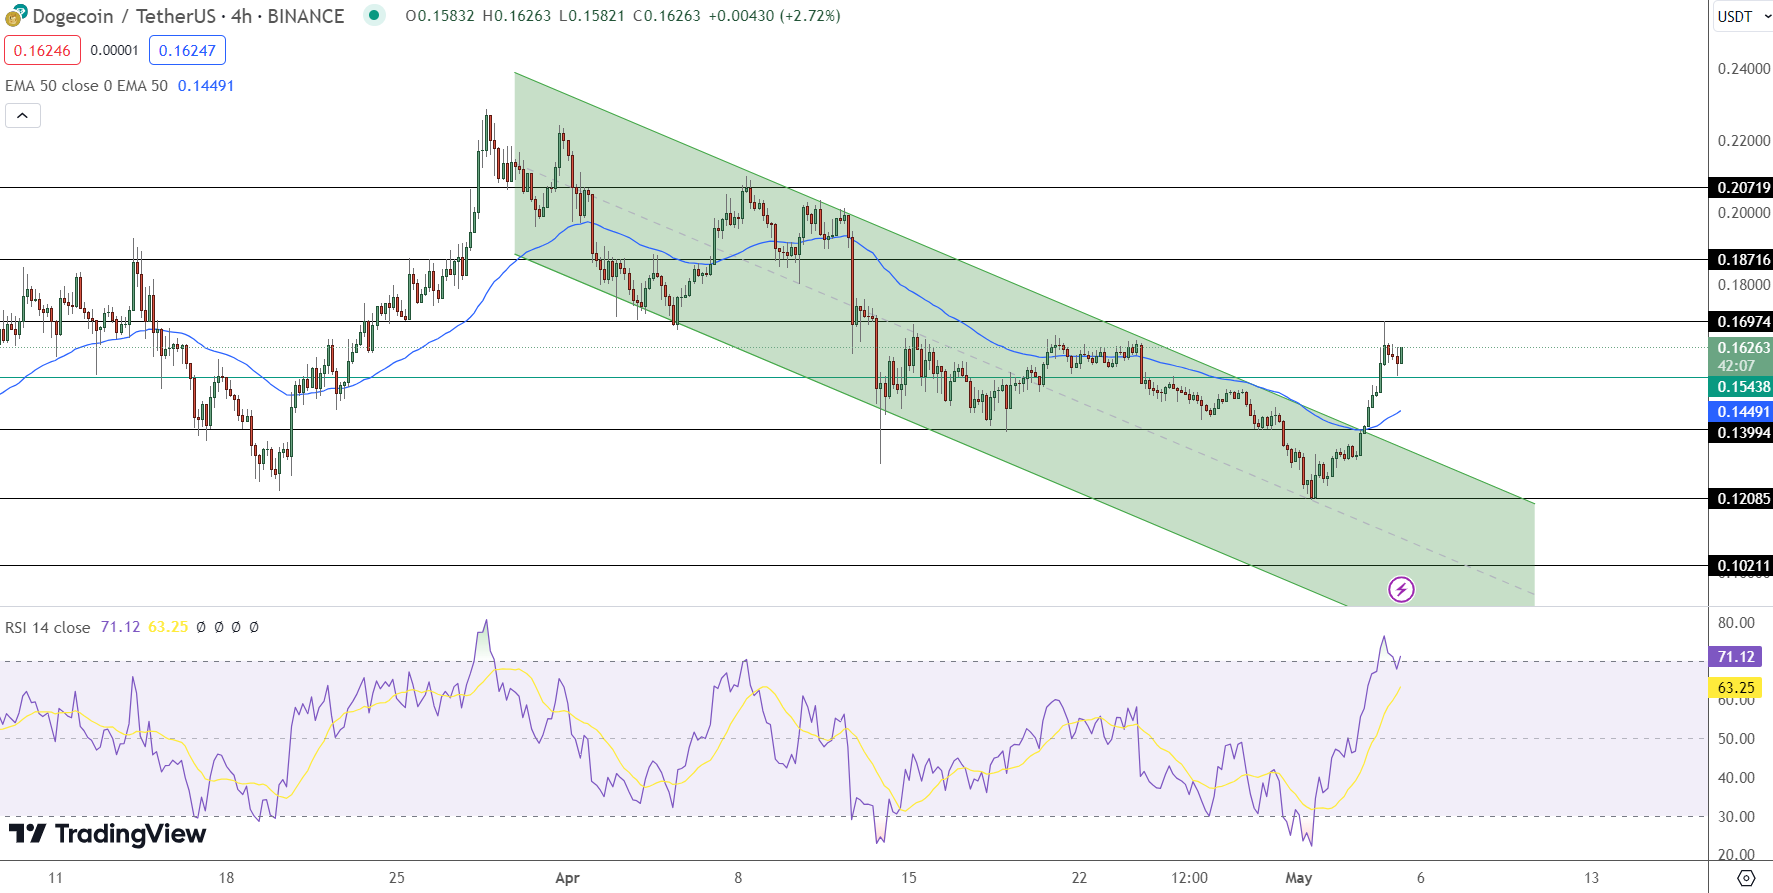 Dogecoin Price Chart - Source: Tradingview